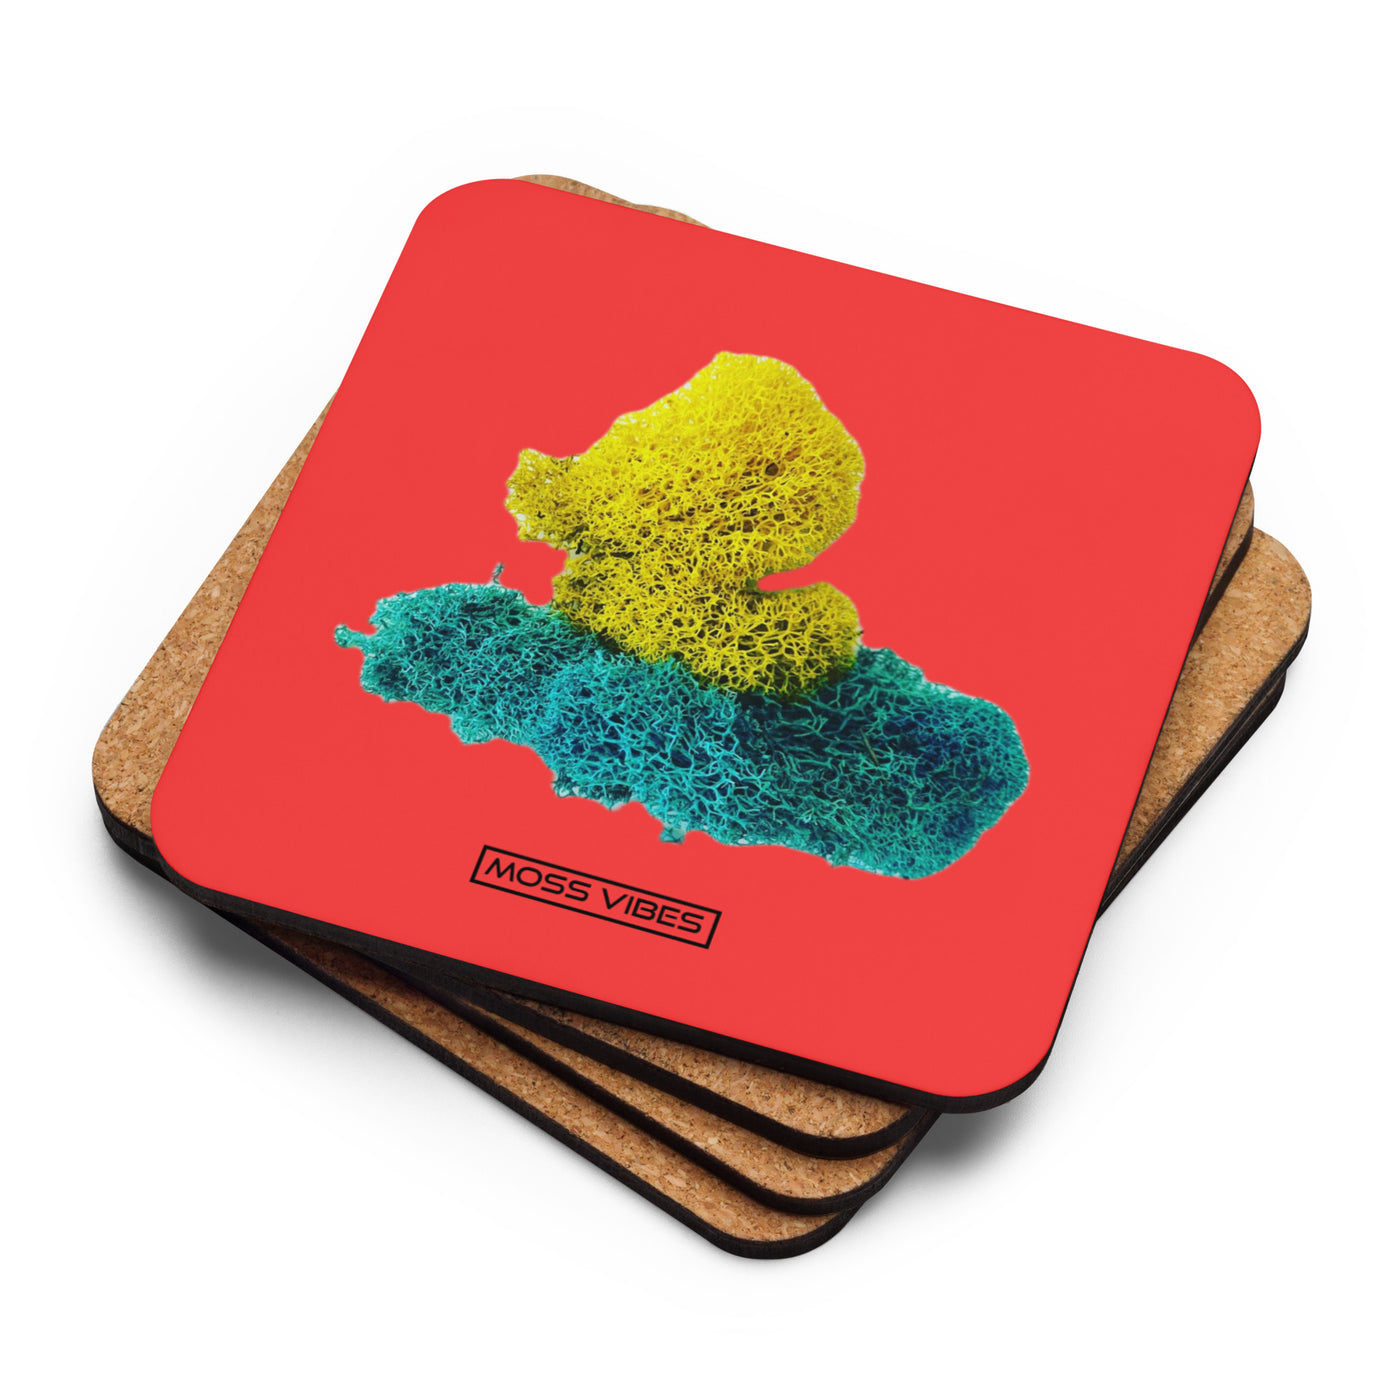 DUCK IT NFT Red Square Cork-back coaster